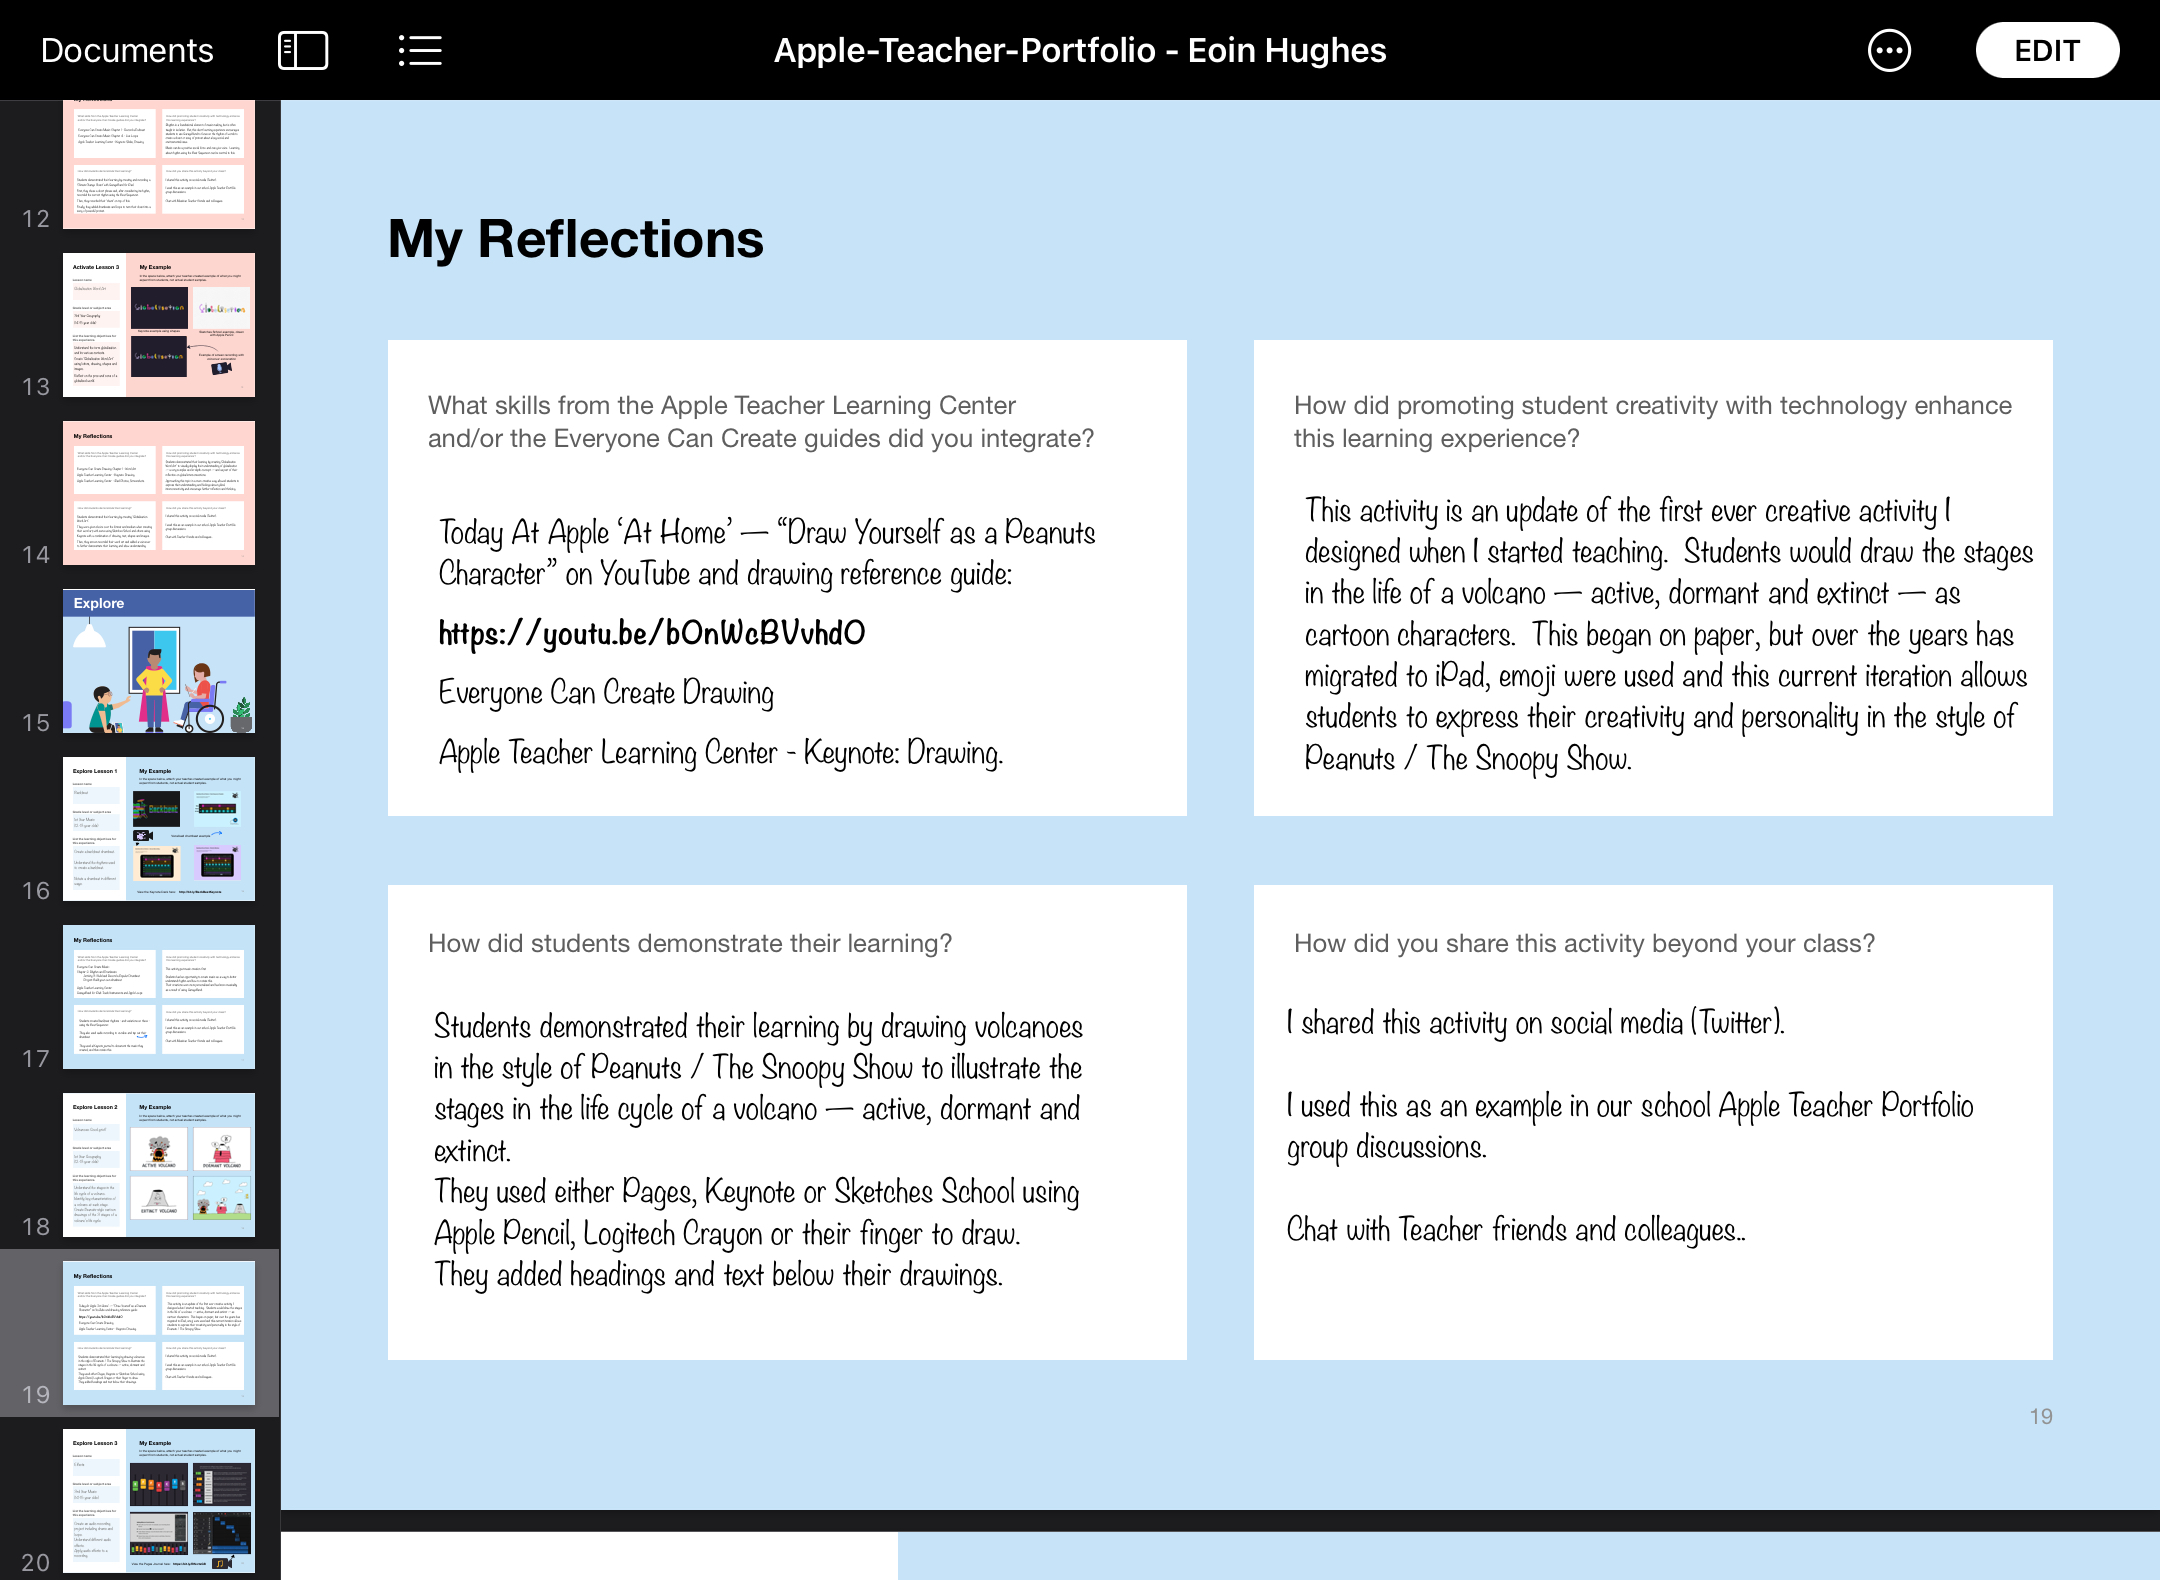 Apple Teacher Portfolio Explore lesson 2 screenshot. Includes reflections on skills, and how it promoted student creativity.